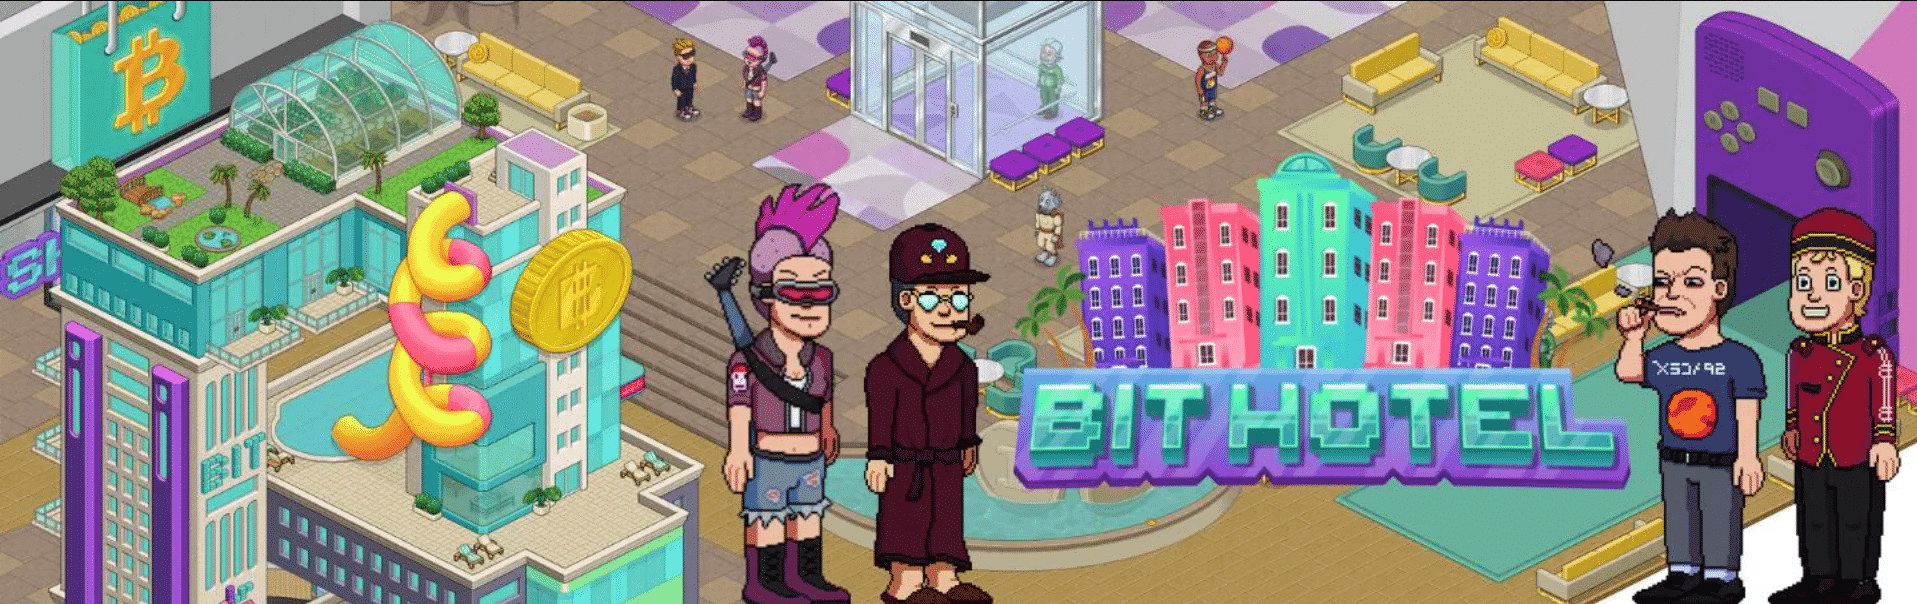 Bit Hotel is an online NFT game on the Ferrum Network with play-to-earn social dynamics where players collect NFT items to earn rewards.